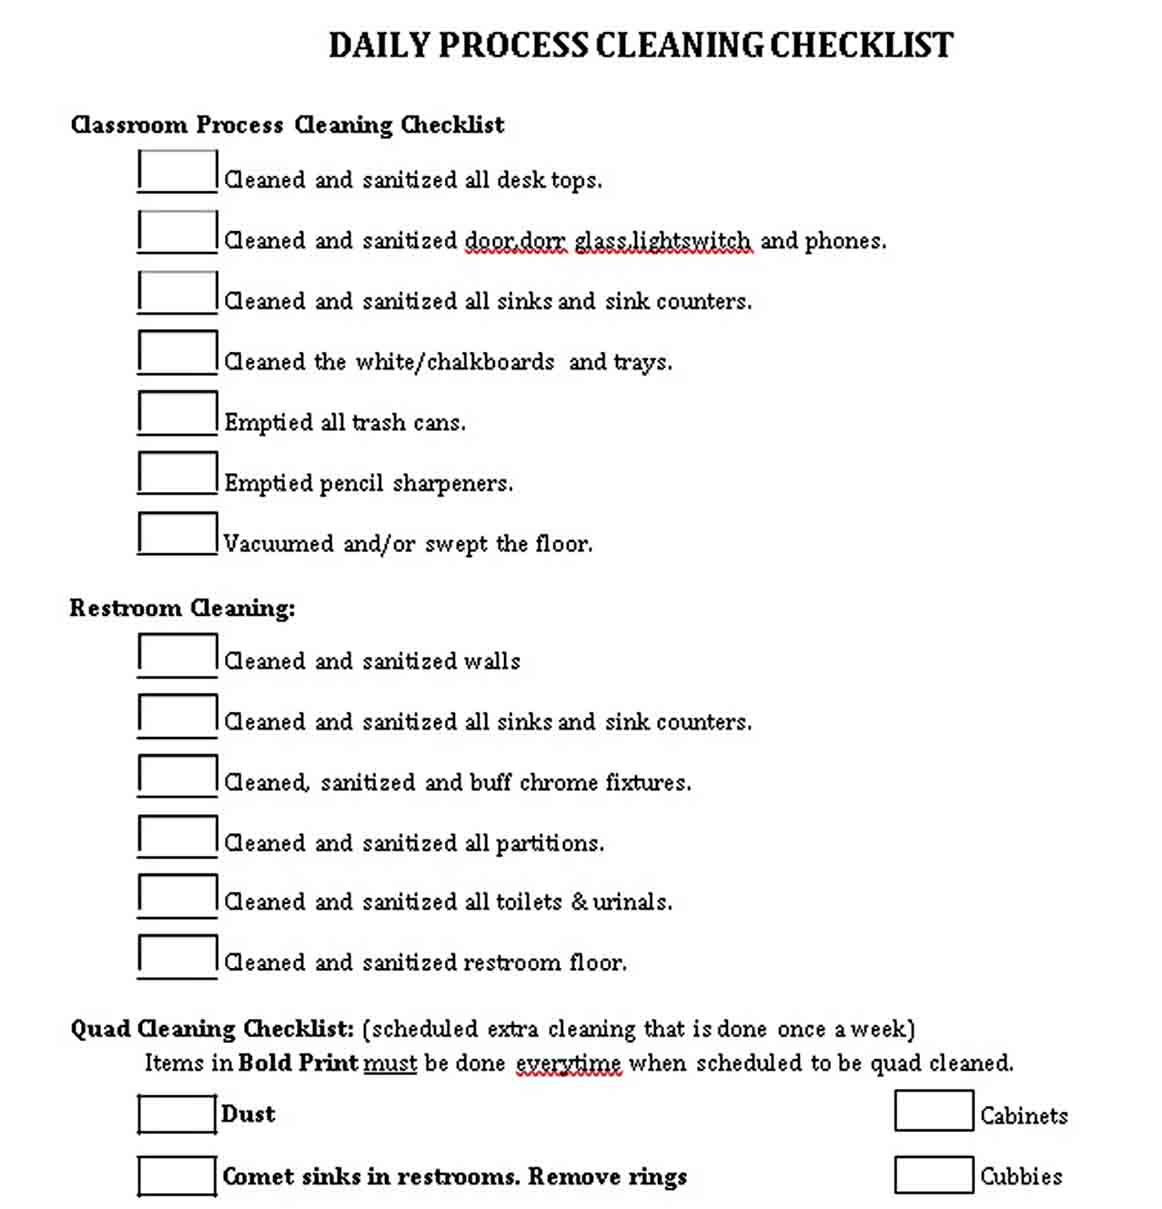 School Cleaning Schedule Template  think moldova Pertaining To Classroom Cleaning Checklist Template Regarding Classroom Cleaning Checklist Template